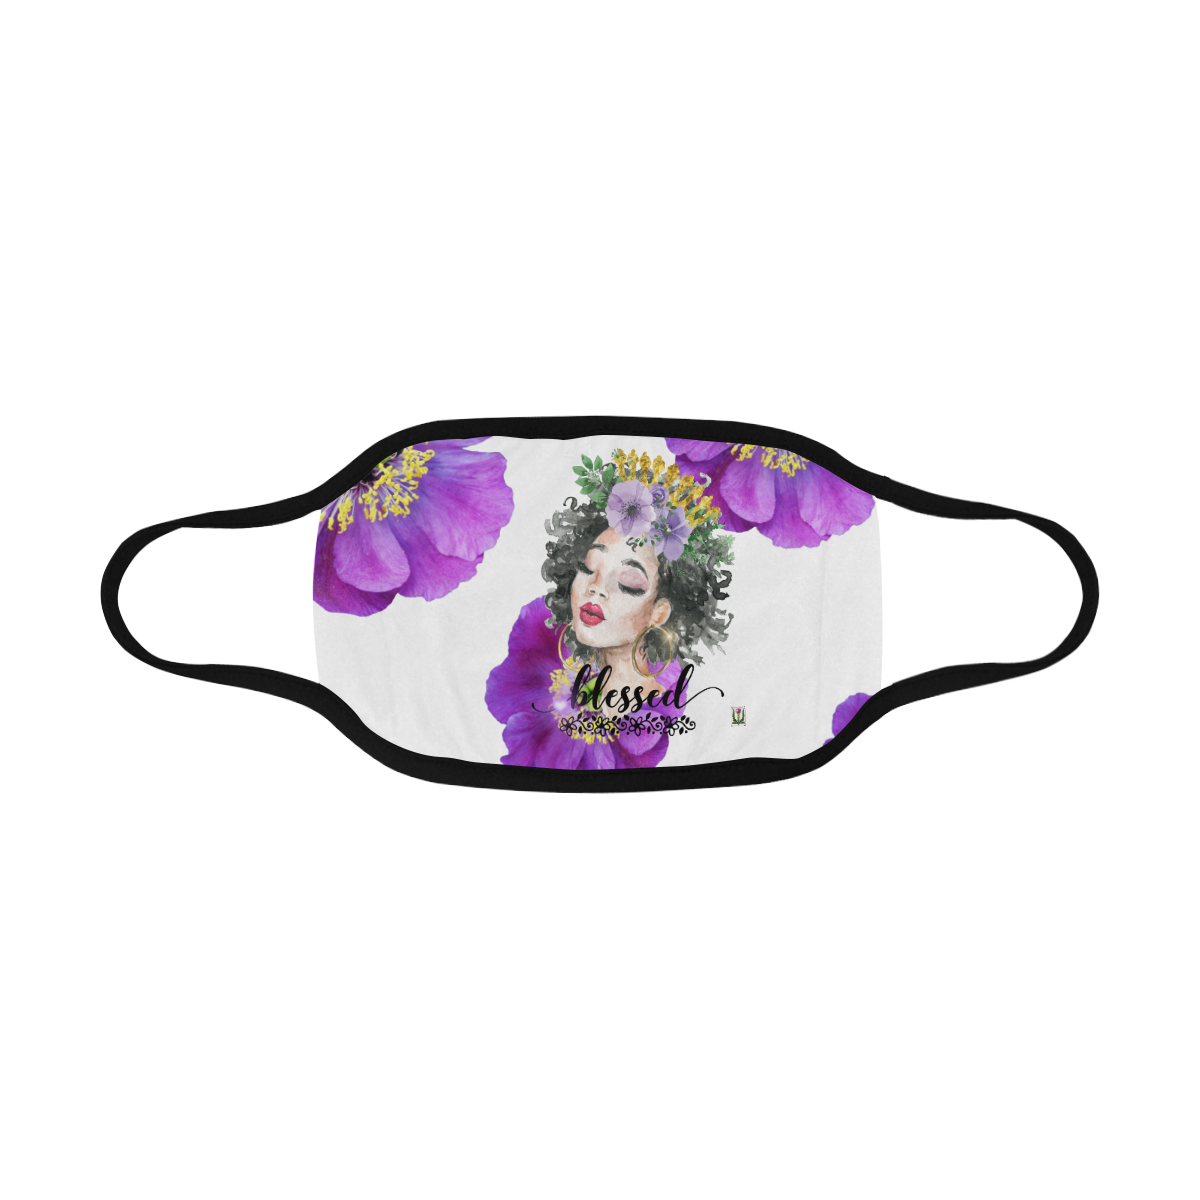 Fairlings Delight's The Word Collection- Blessed 53086a16 Mouth Mask